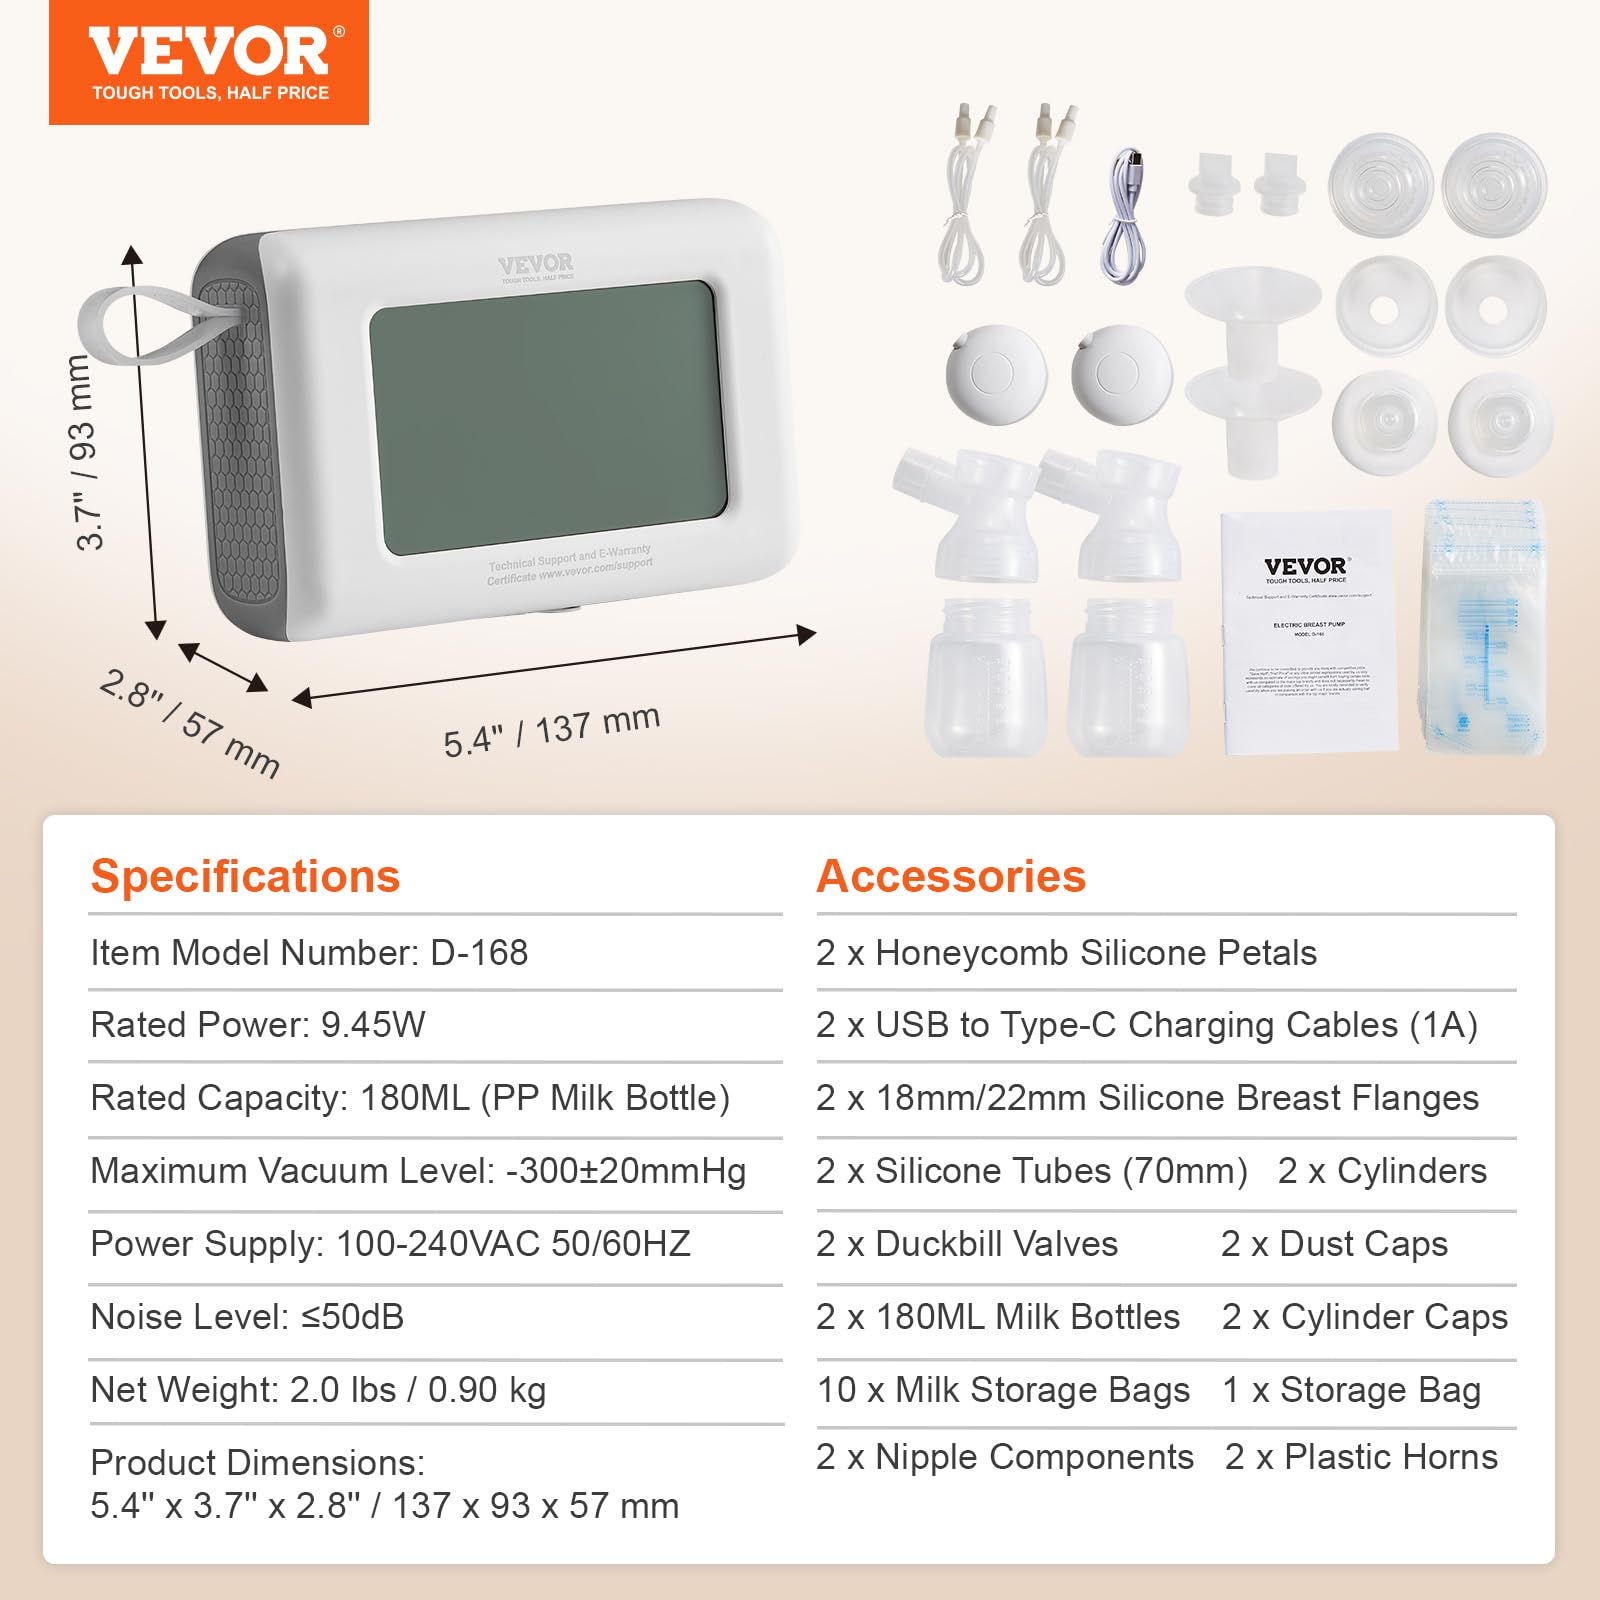 VEVOR Breast Pump, Single/Double Adjustable Electric Breast Pumps, 4 Modes & 9/15 Levels, Reciprocating Piston Pump, 4000mAH Anti-Backflow Breastfeeding Pump with 300mmHg High Suction, 18/22mm Flange